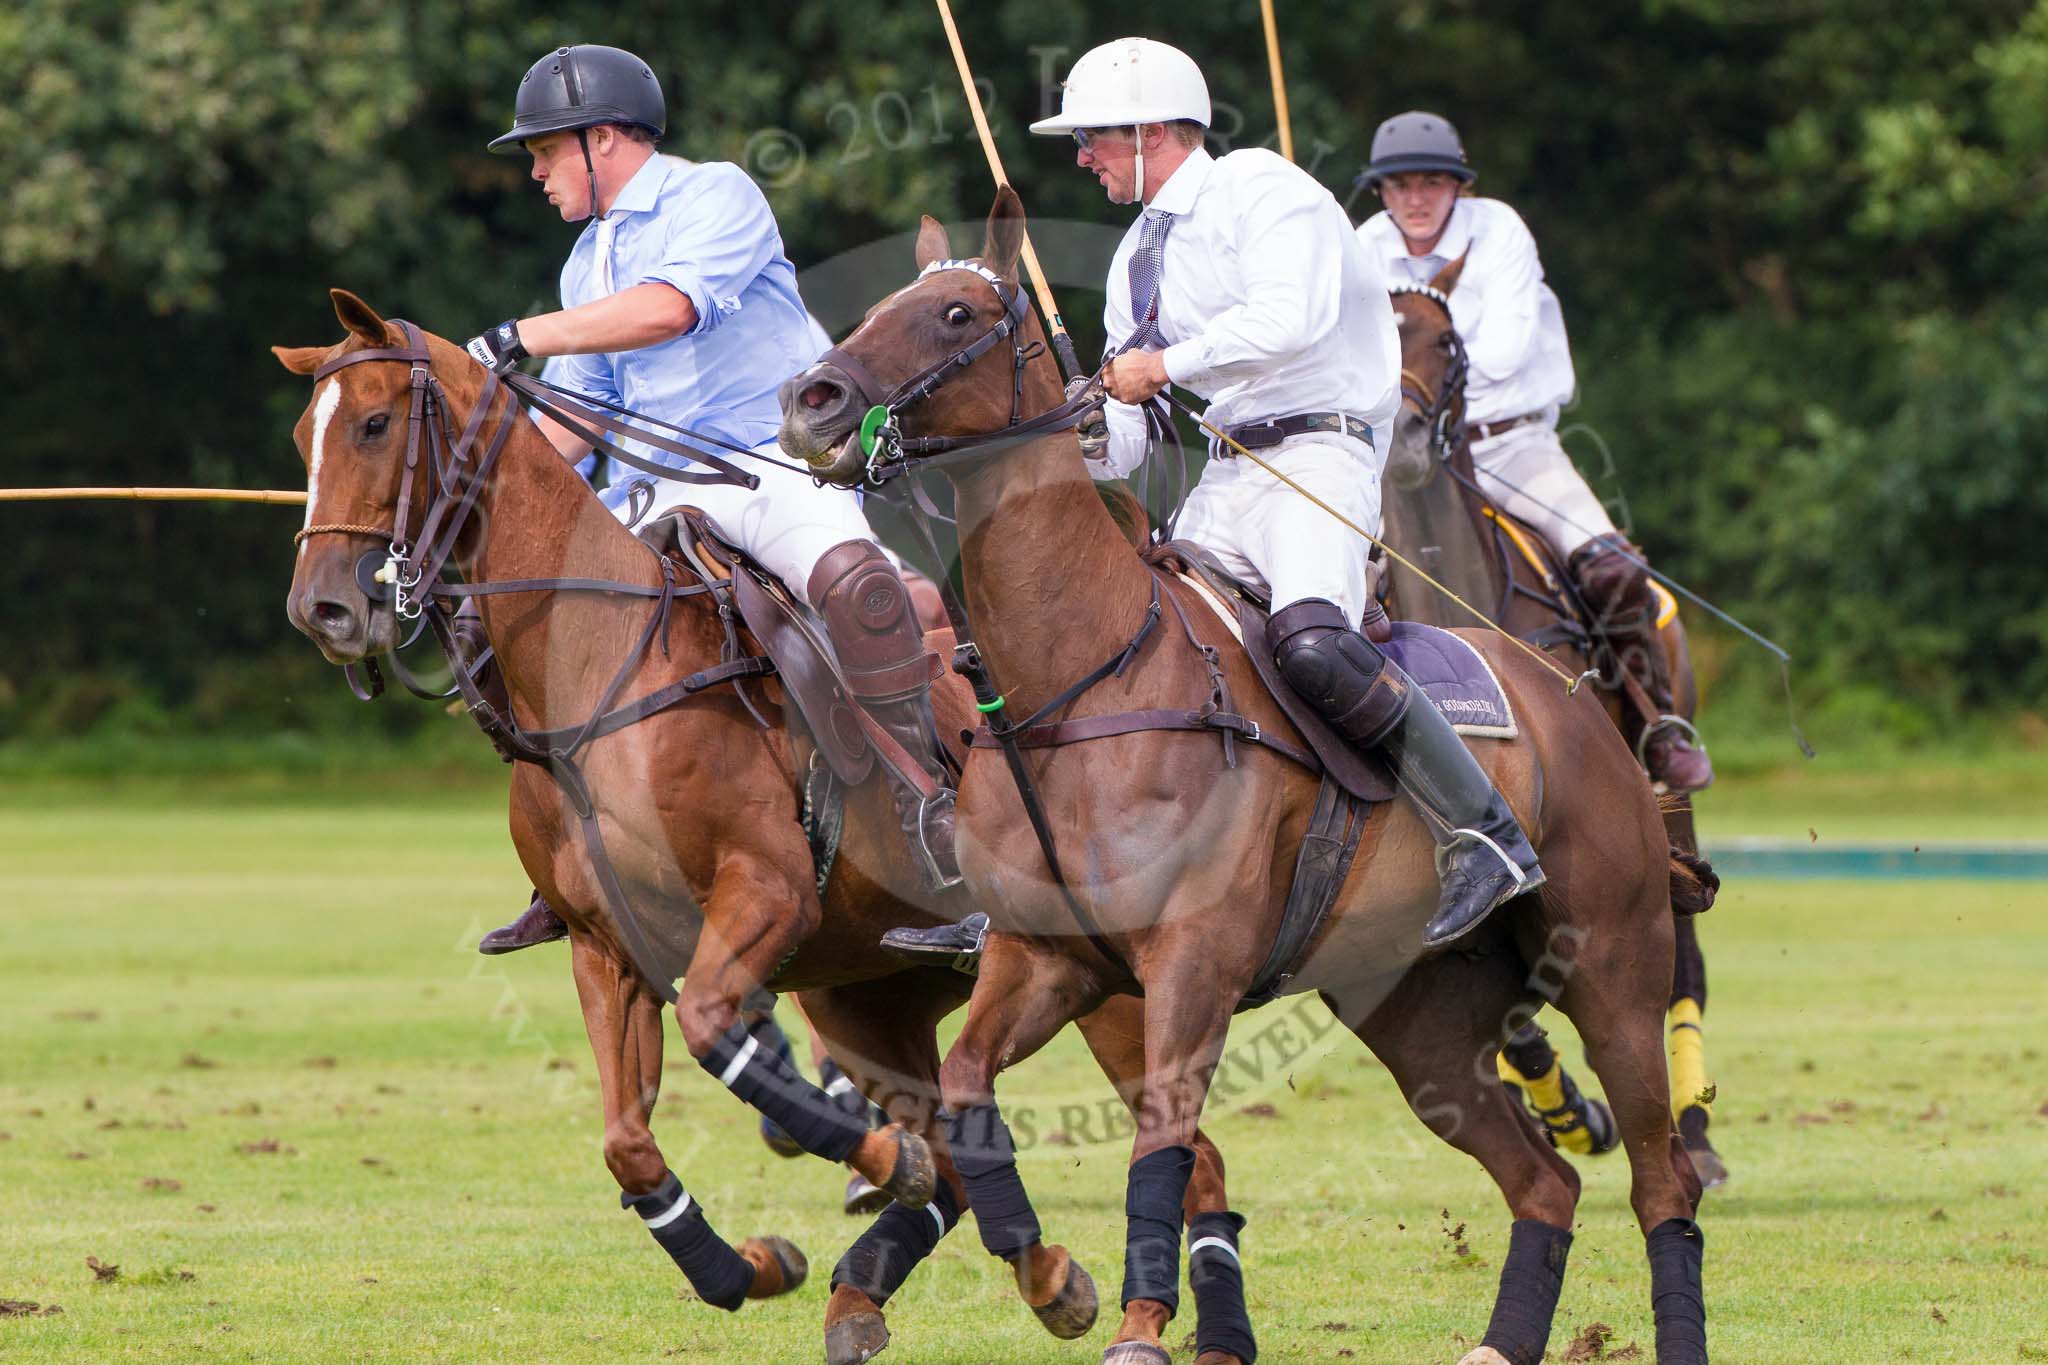 7th Heritage Polo Cup semi-finals: Alex Vent challenged turning on the ball, Pedro Harrison is there to attack..
Hurtwood Park Polo Club,
Ewhurst Green,
Surrey,
United Kingdom,
on 04 August 2012 at 16:11, image #311